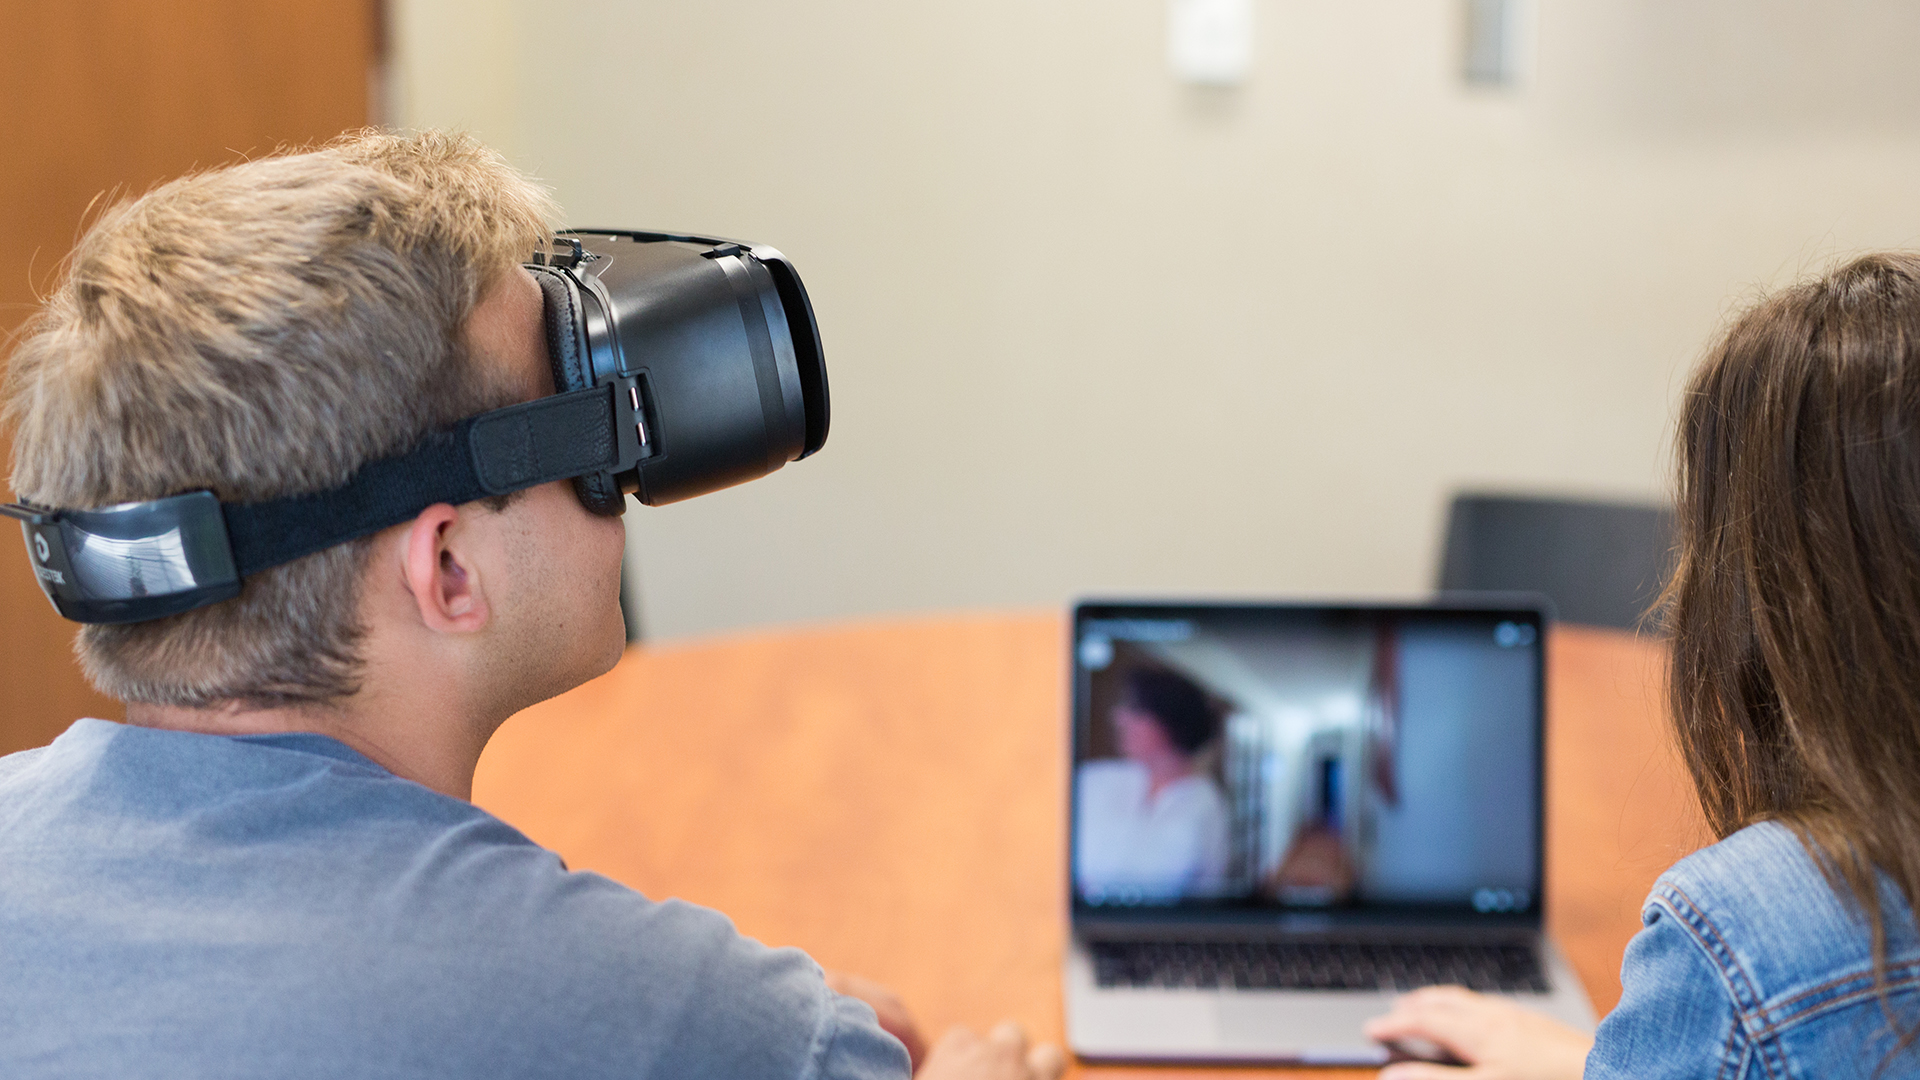 Social Work student using a VR headset